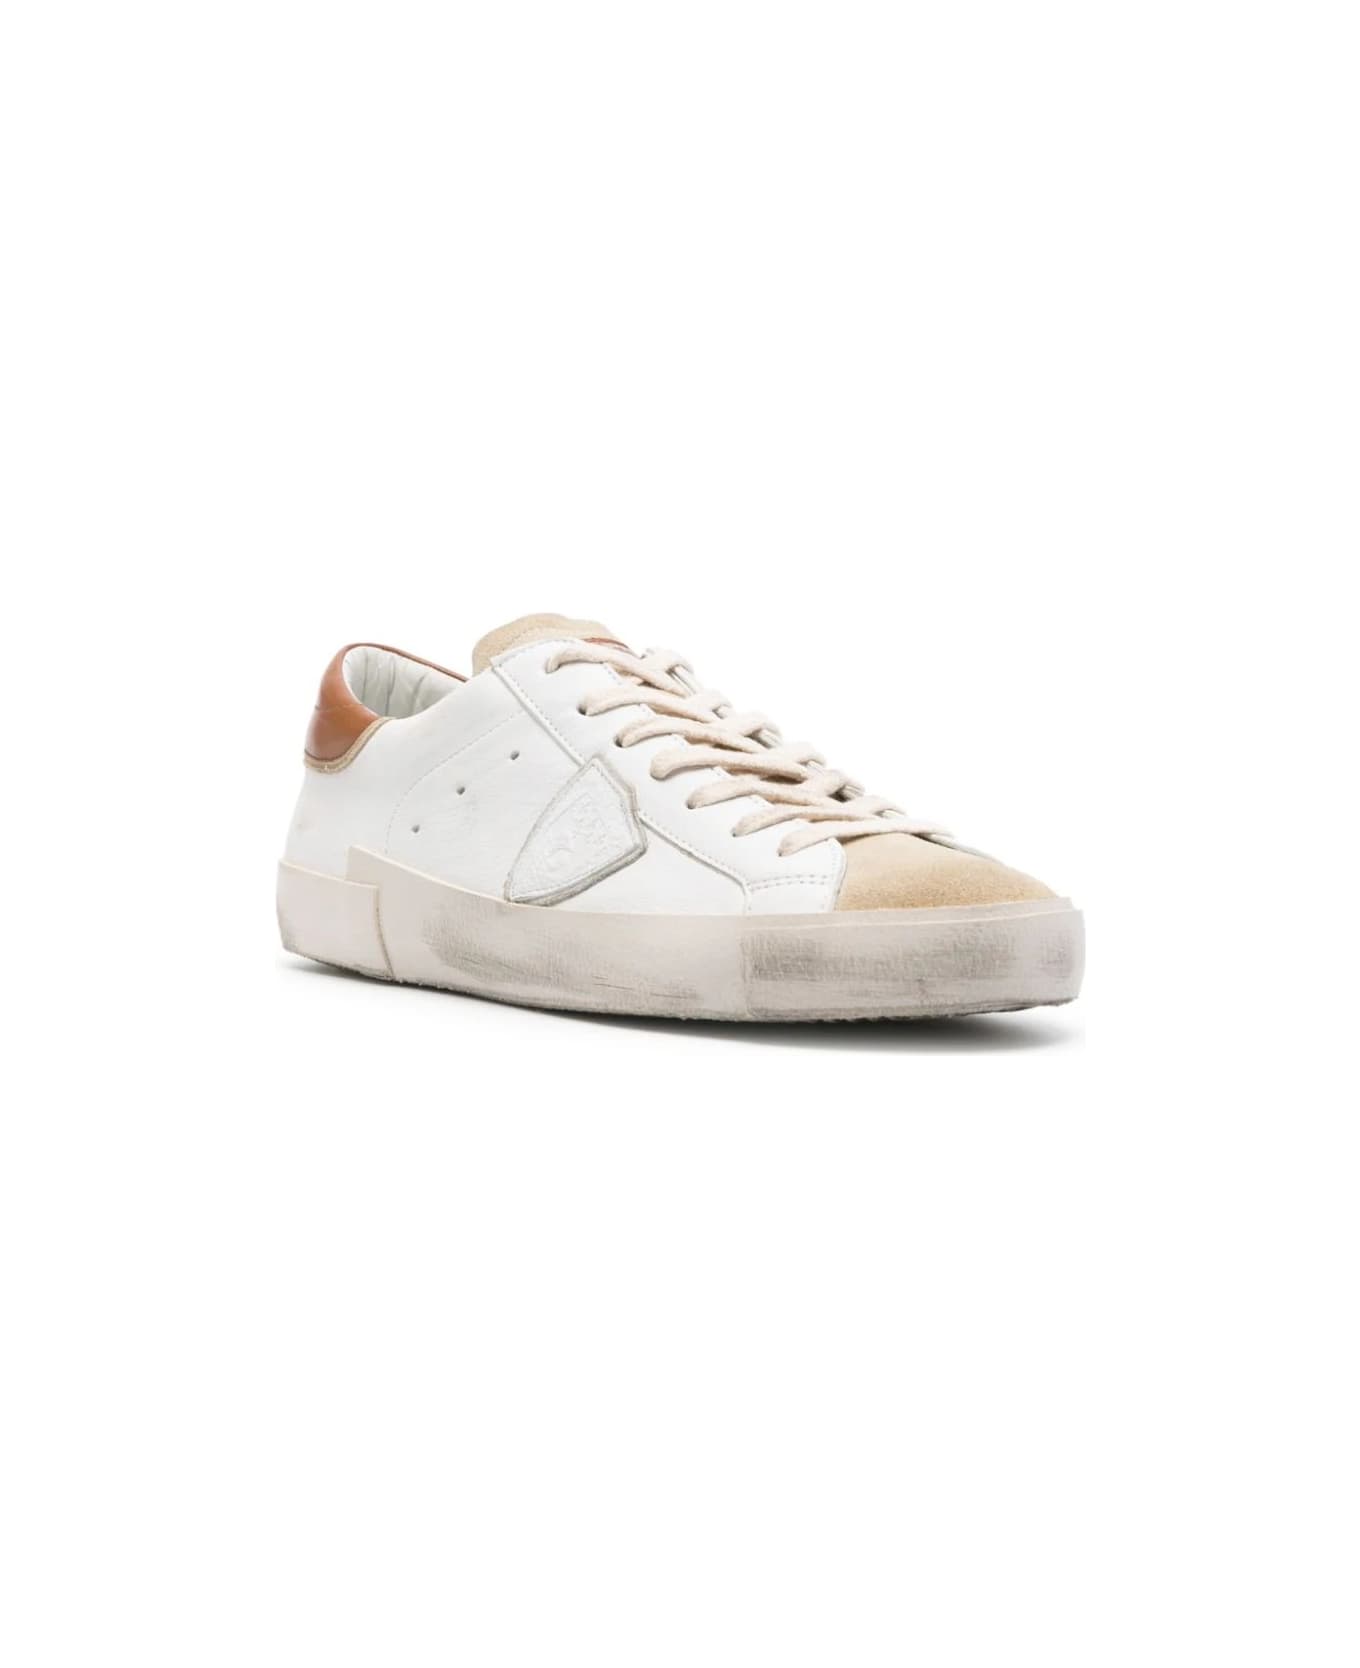 Philippe Model Prsx Low Sneakers - White And Brown - White スニーカー